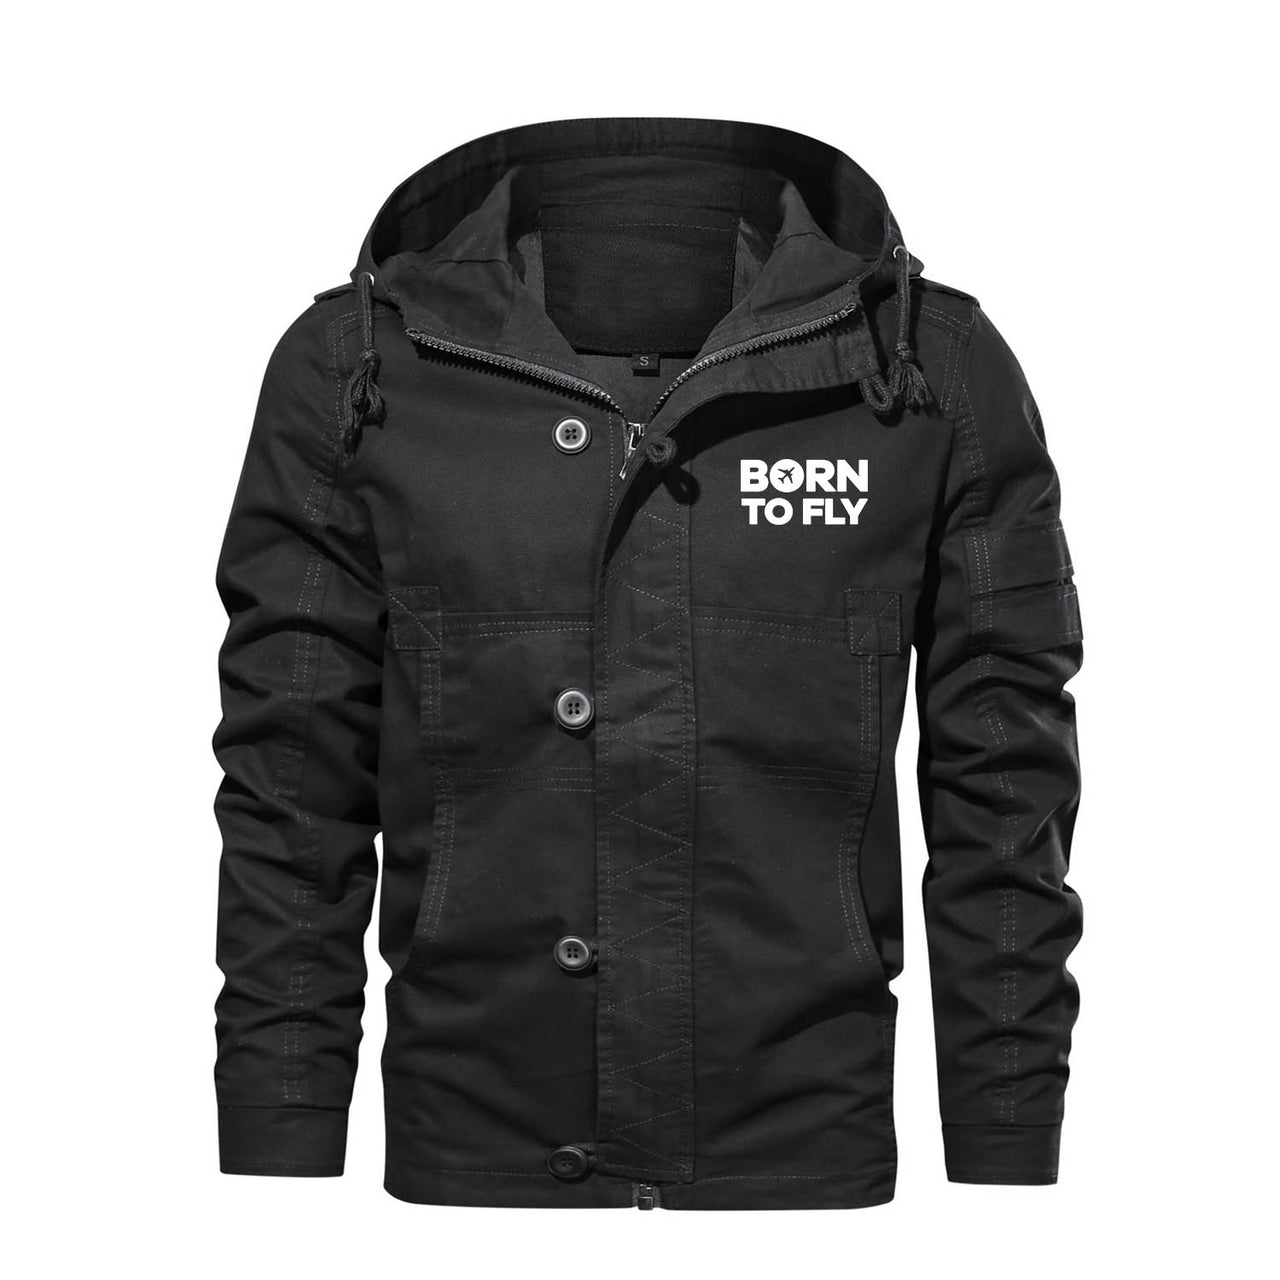 Born To Fly Special Designed Cotton Jackets